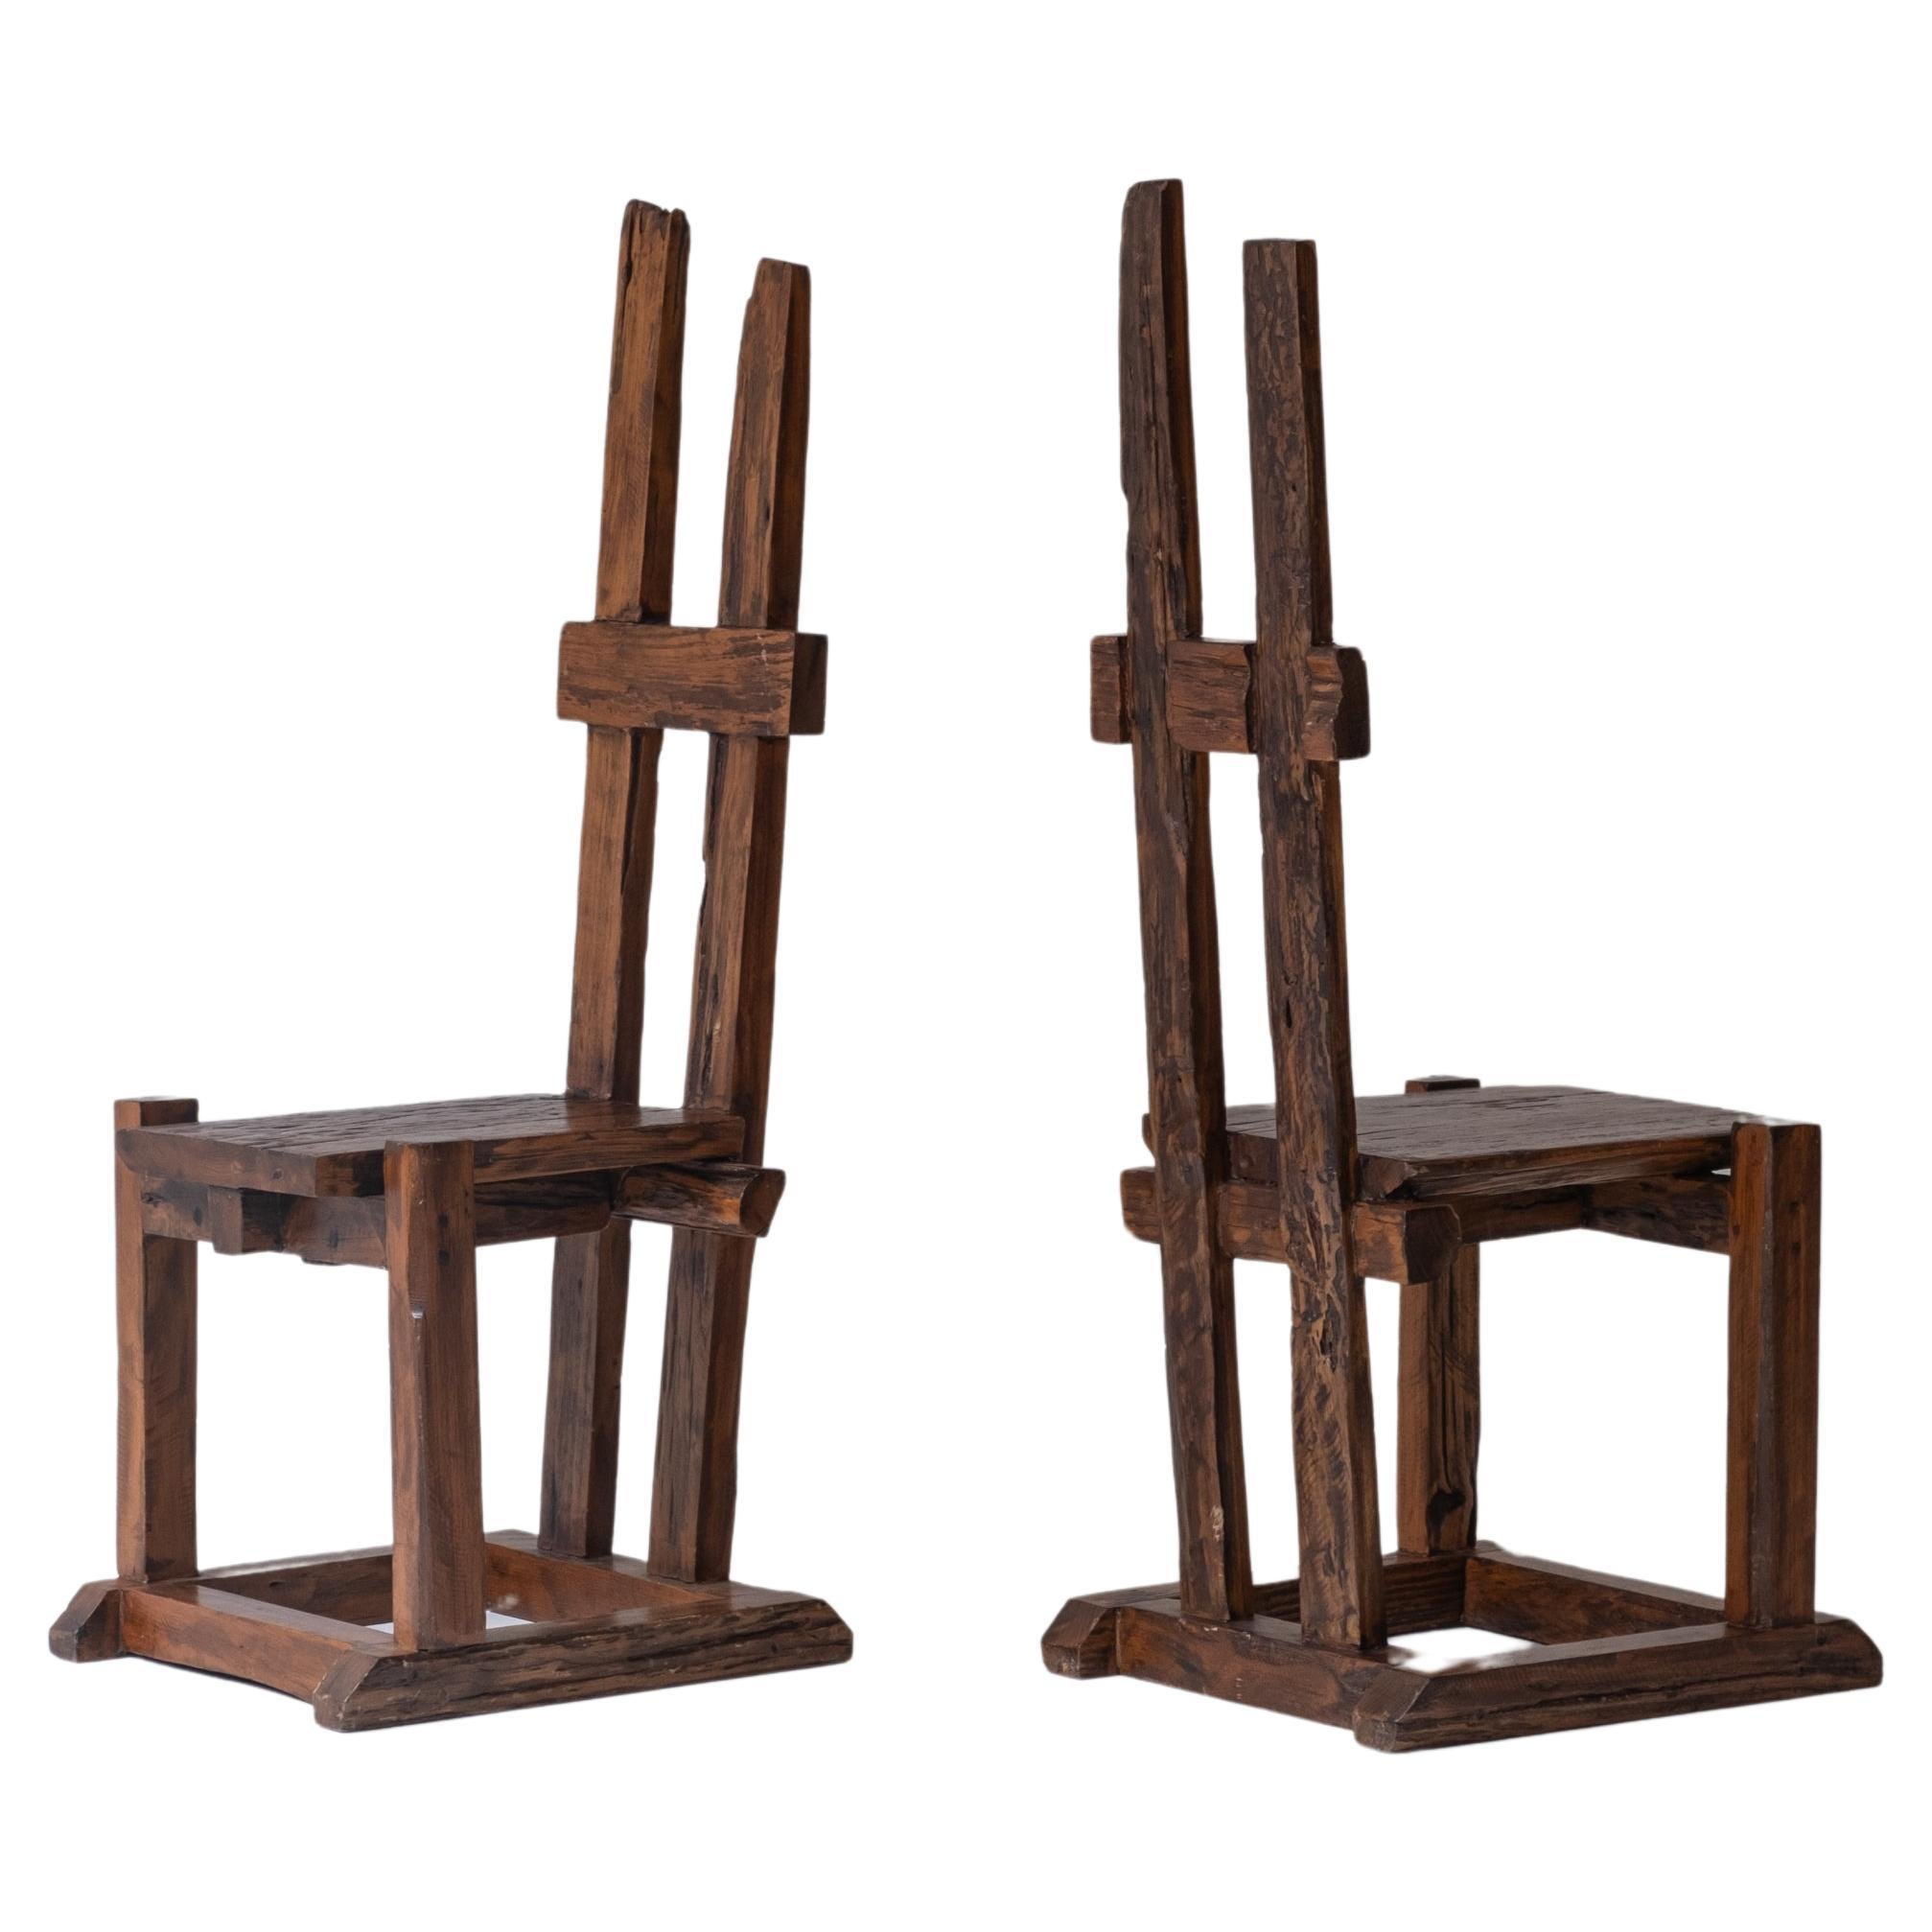 A set primitive high back chairs designed and manufactured during the 1950s